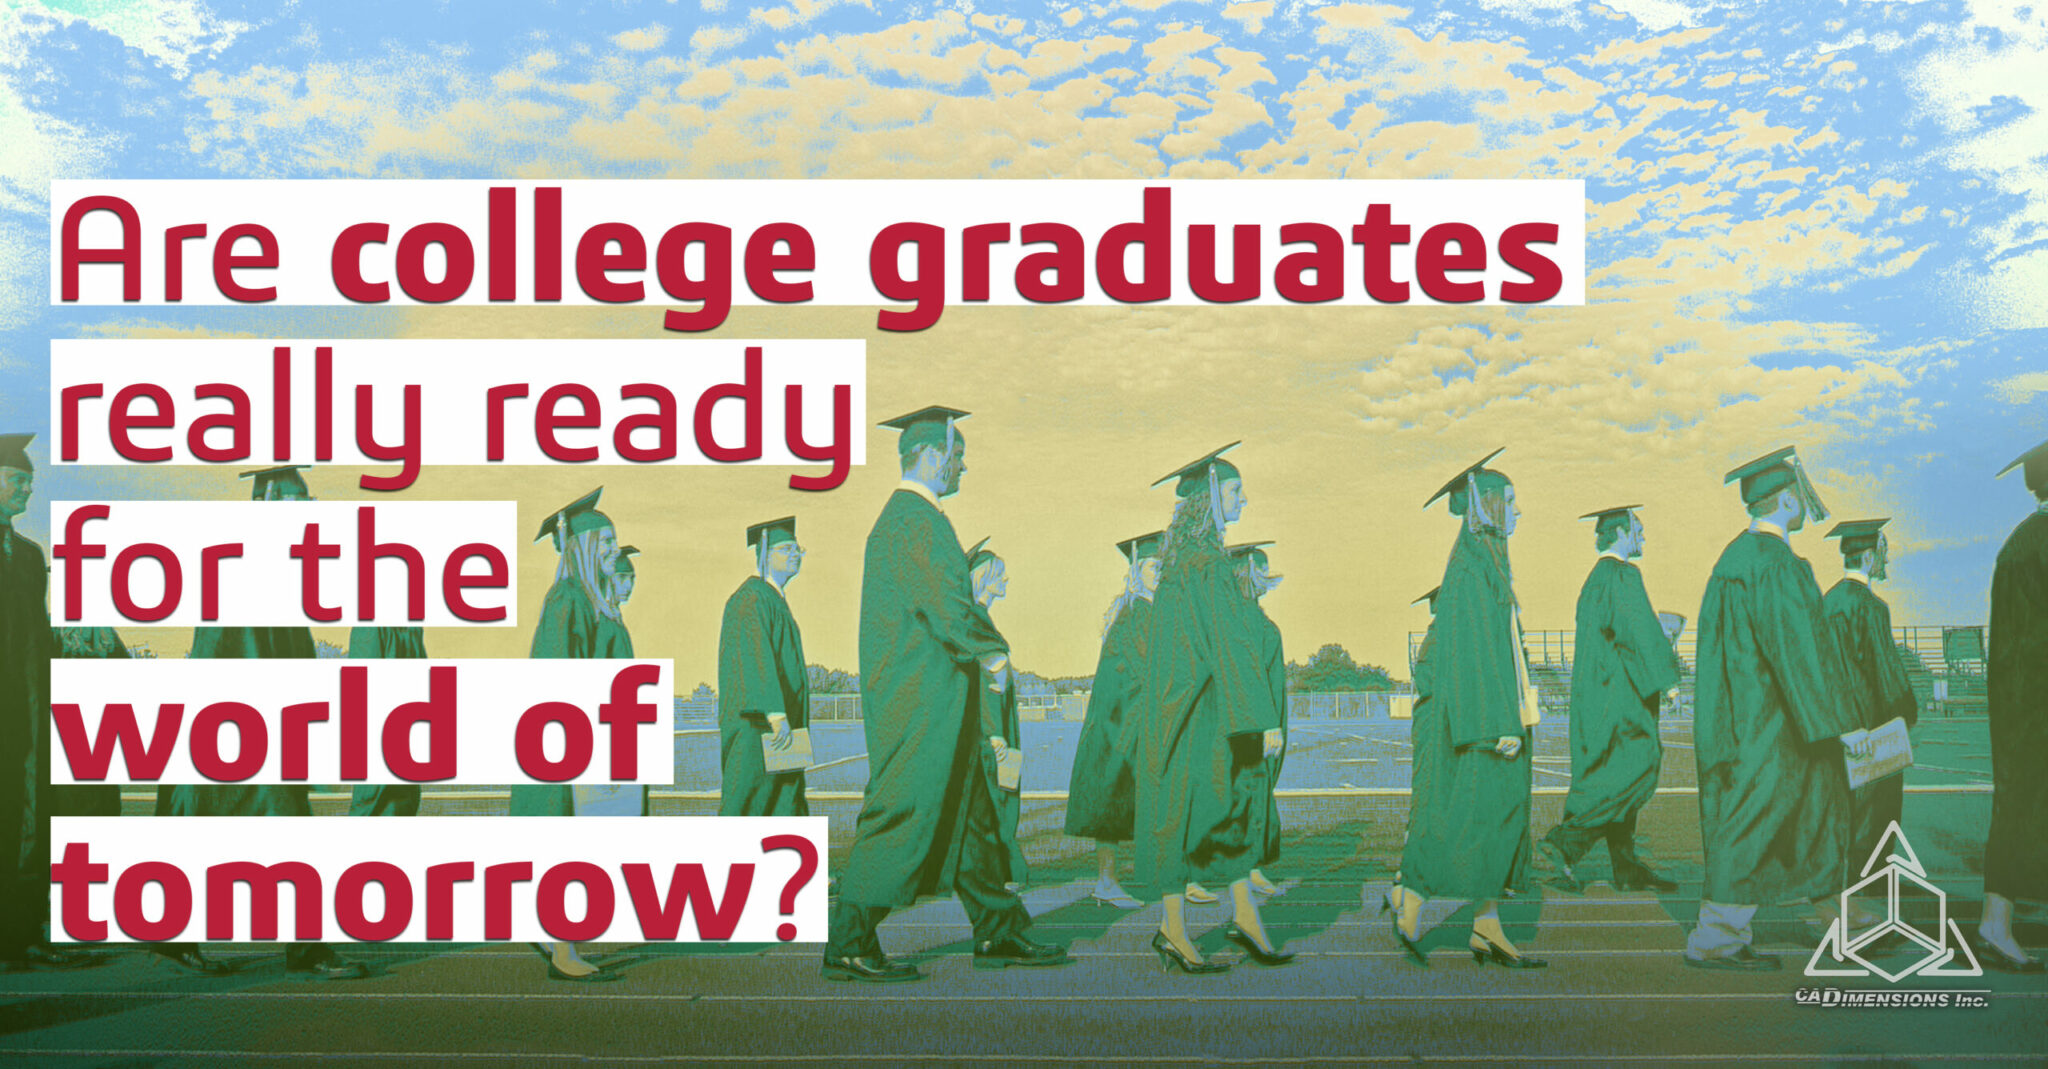 Are college graduates really ready for the world of tomorrow